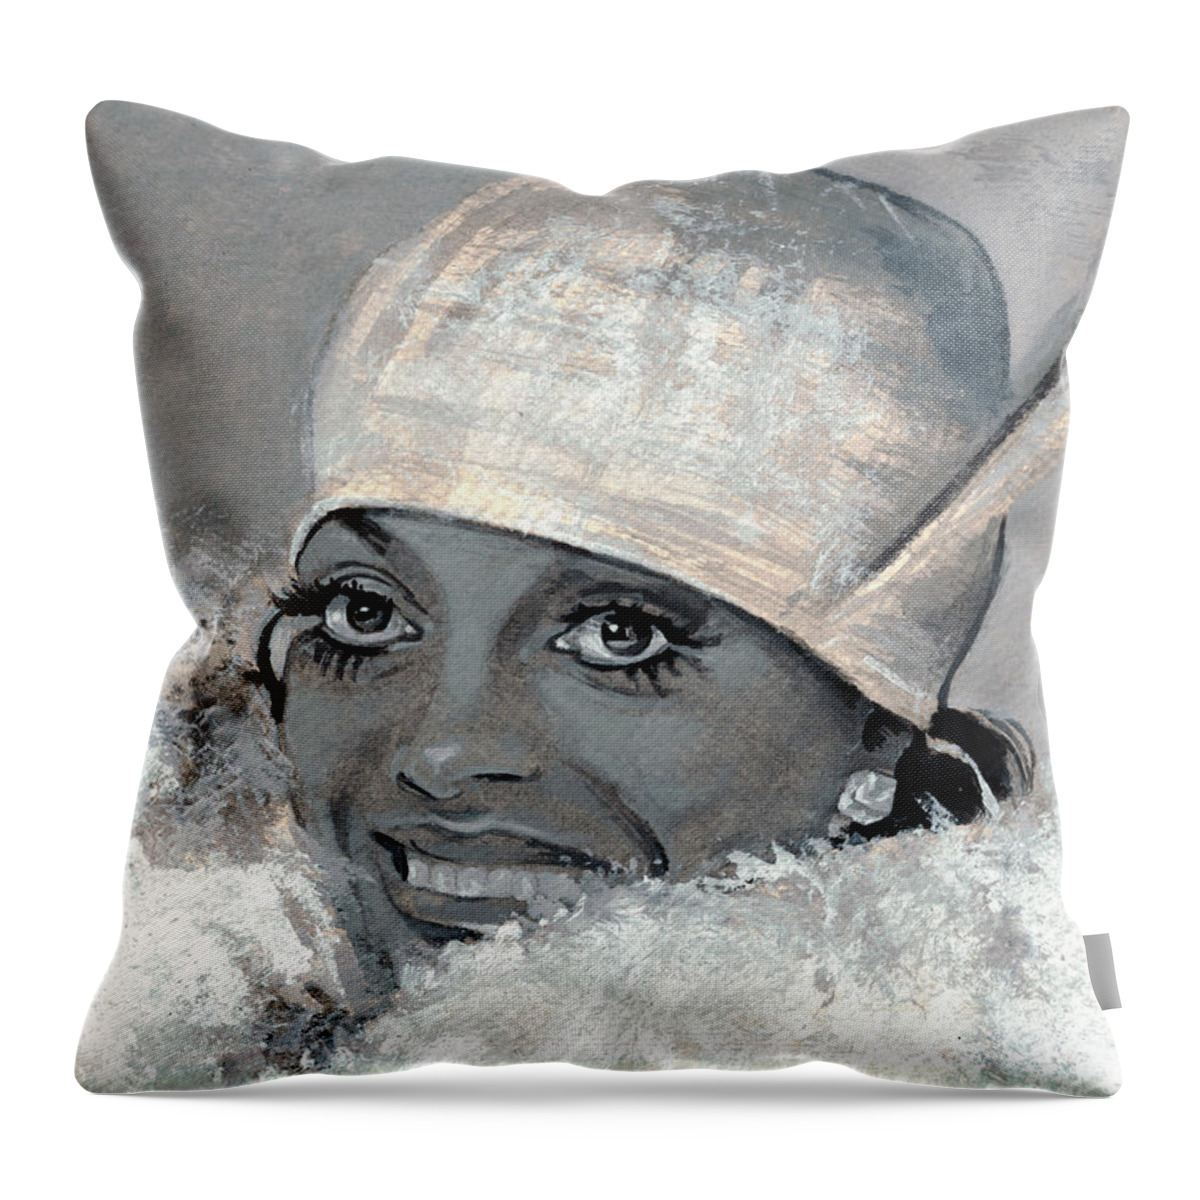 Diana Ross Throw Pillow featuring the painting Diana Ross by Neil Feigeles